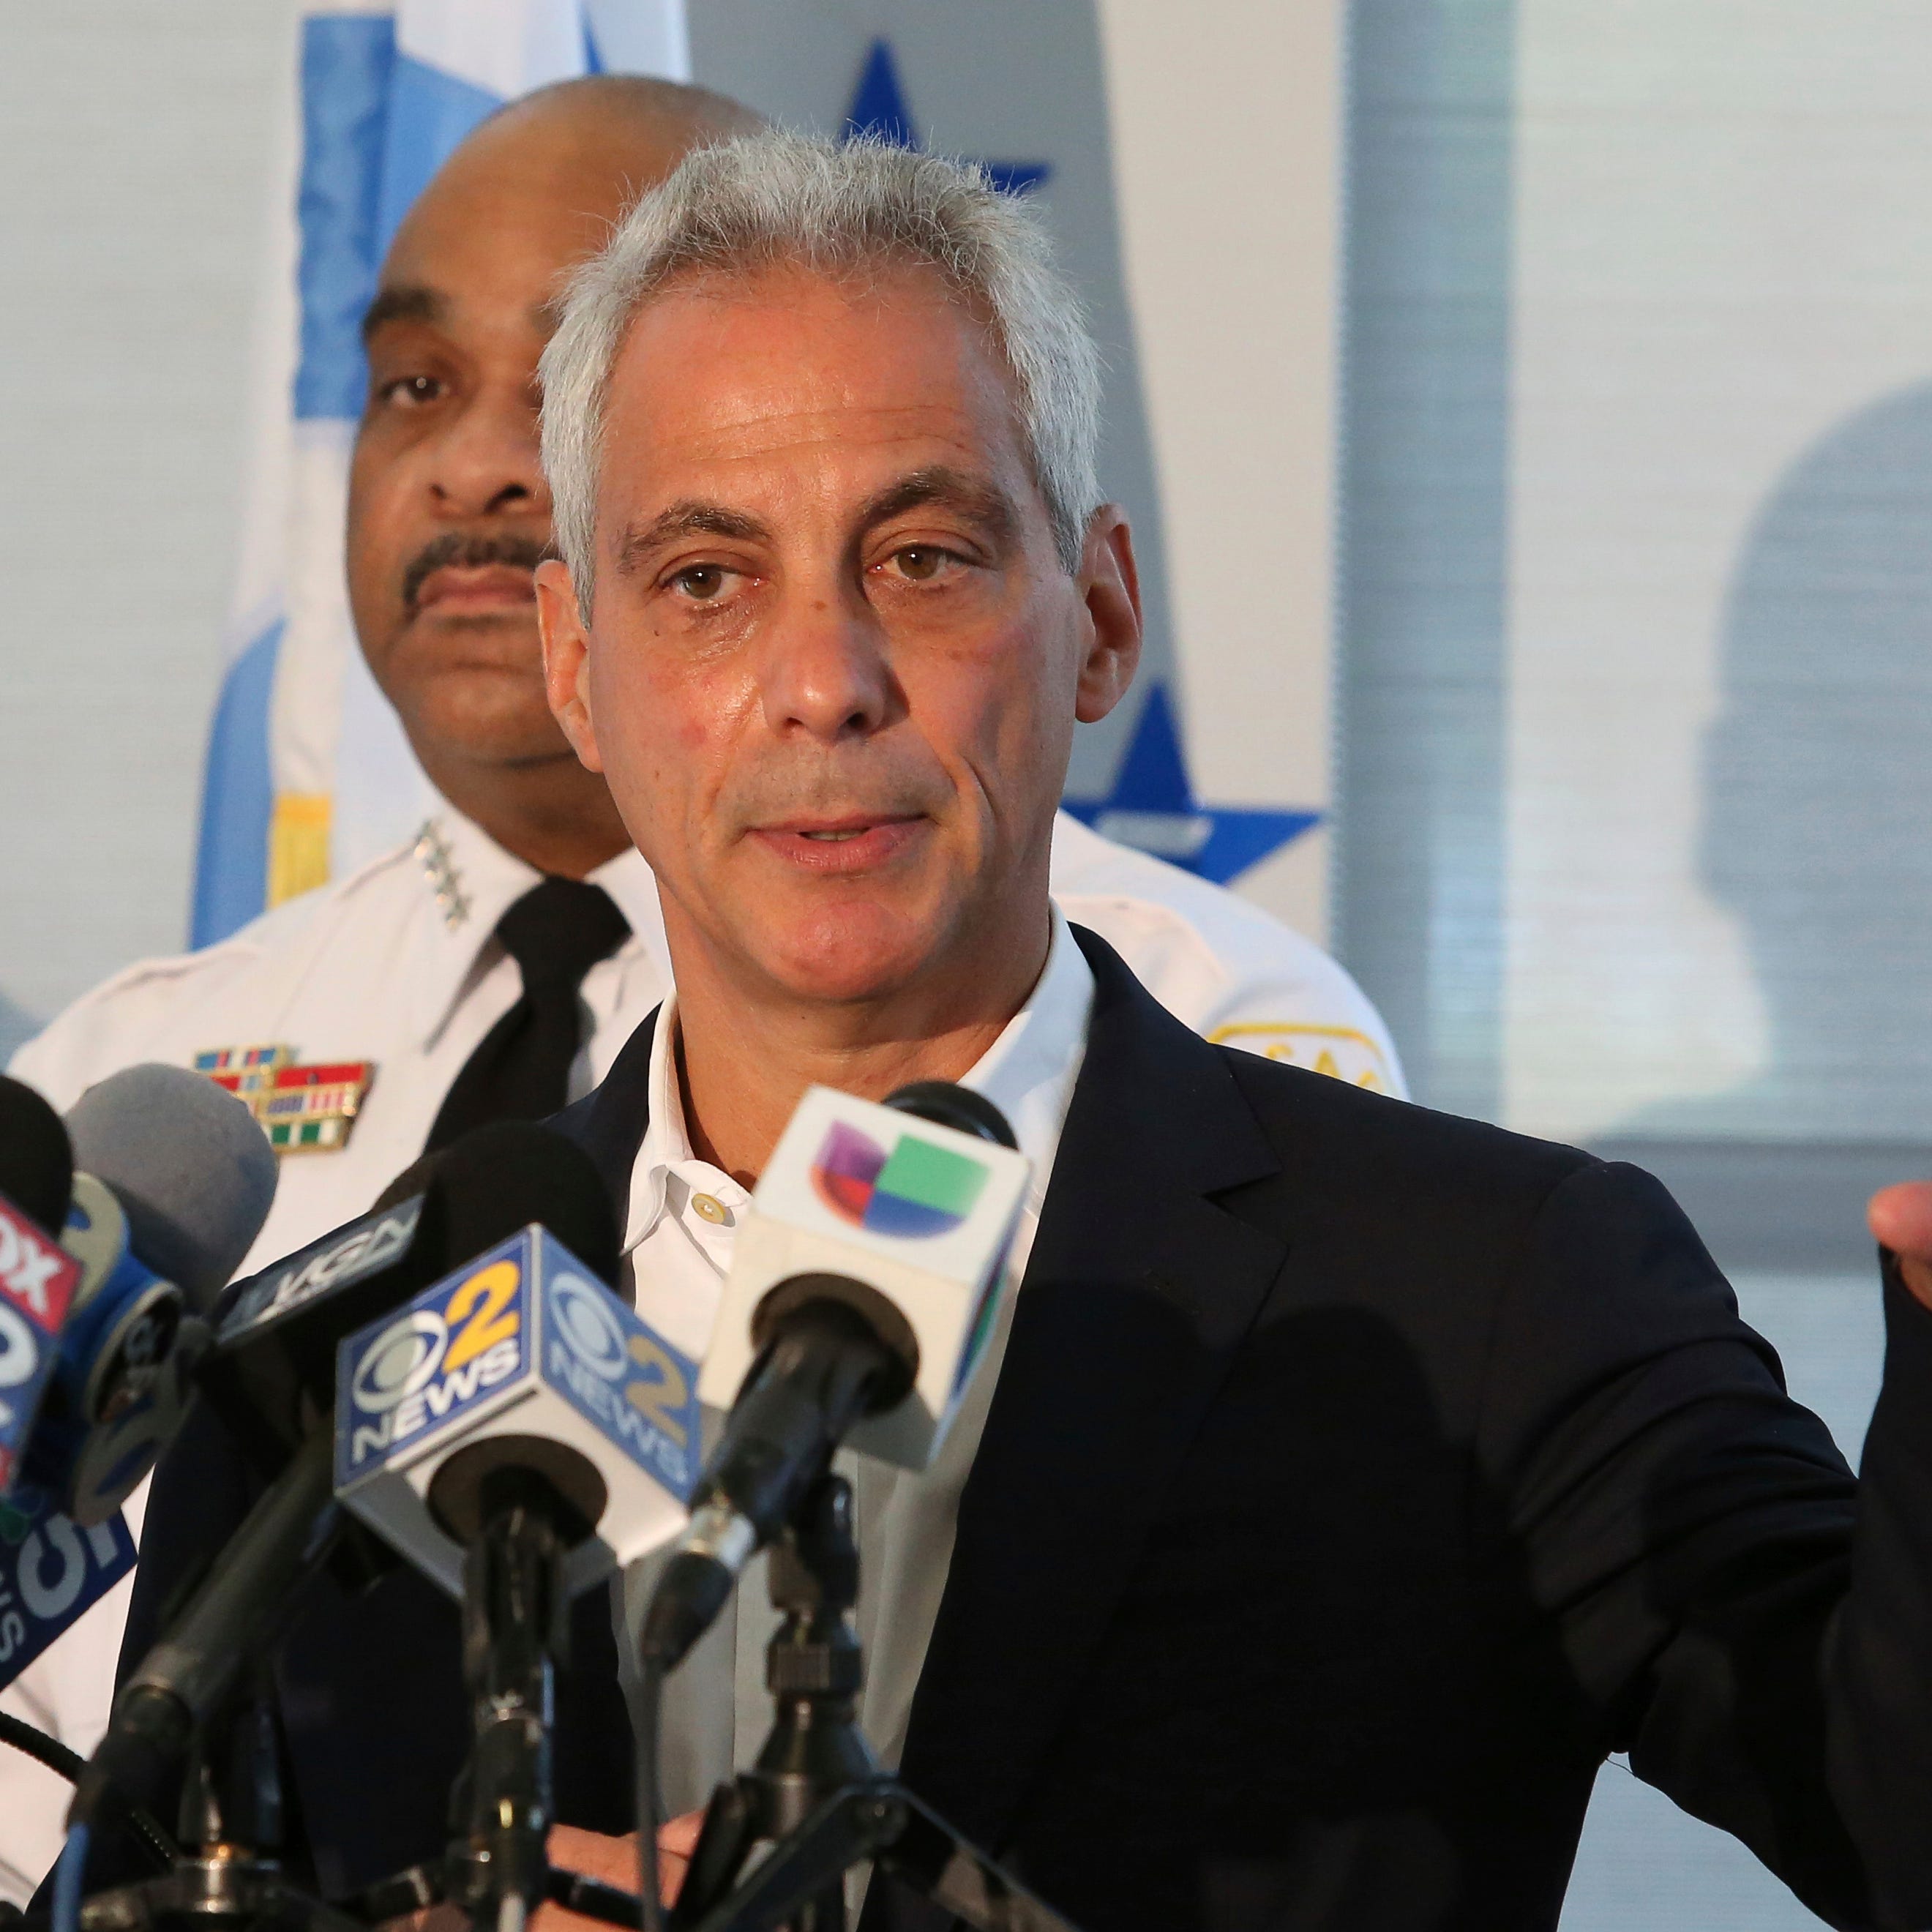 Chicago Mayor Rahm Emanuel speaks at a news conference accompanied by Police Superintendent Eddie Johnson, Monday, Aug. 6, 2018, in Chicago.